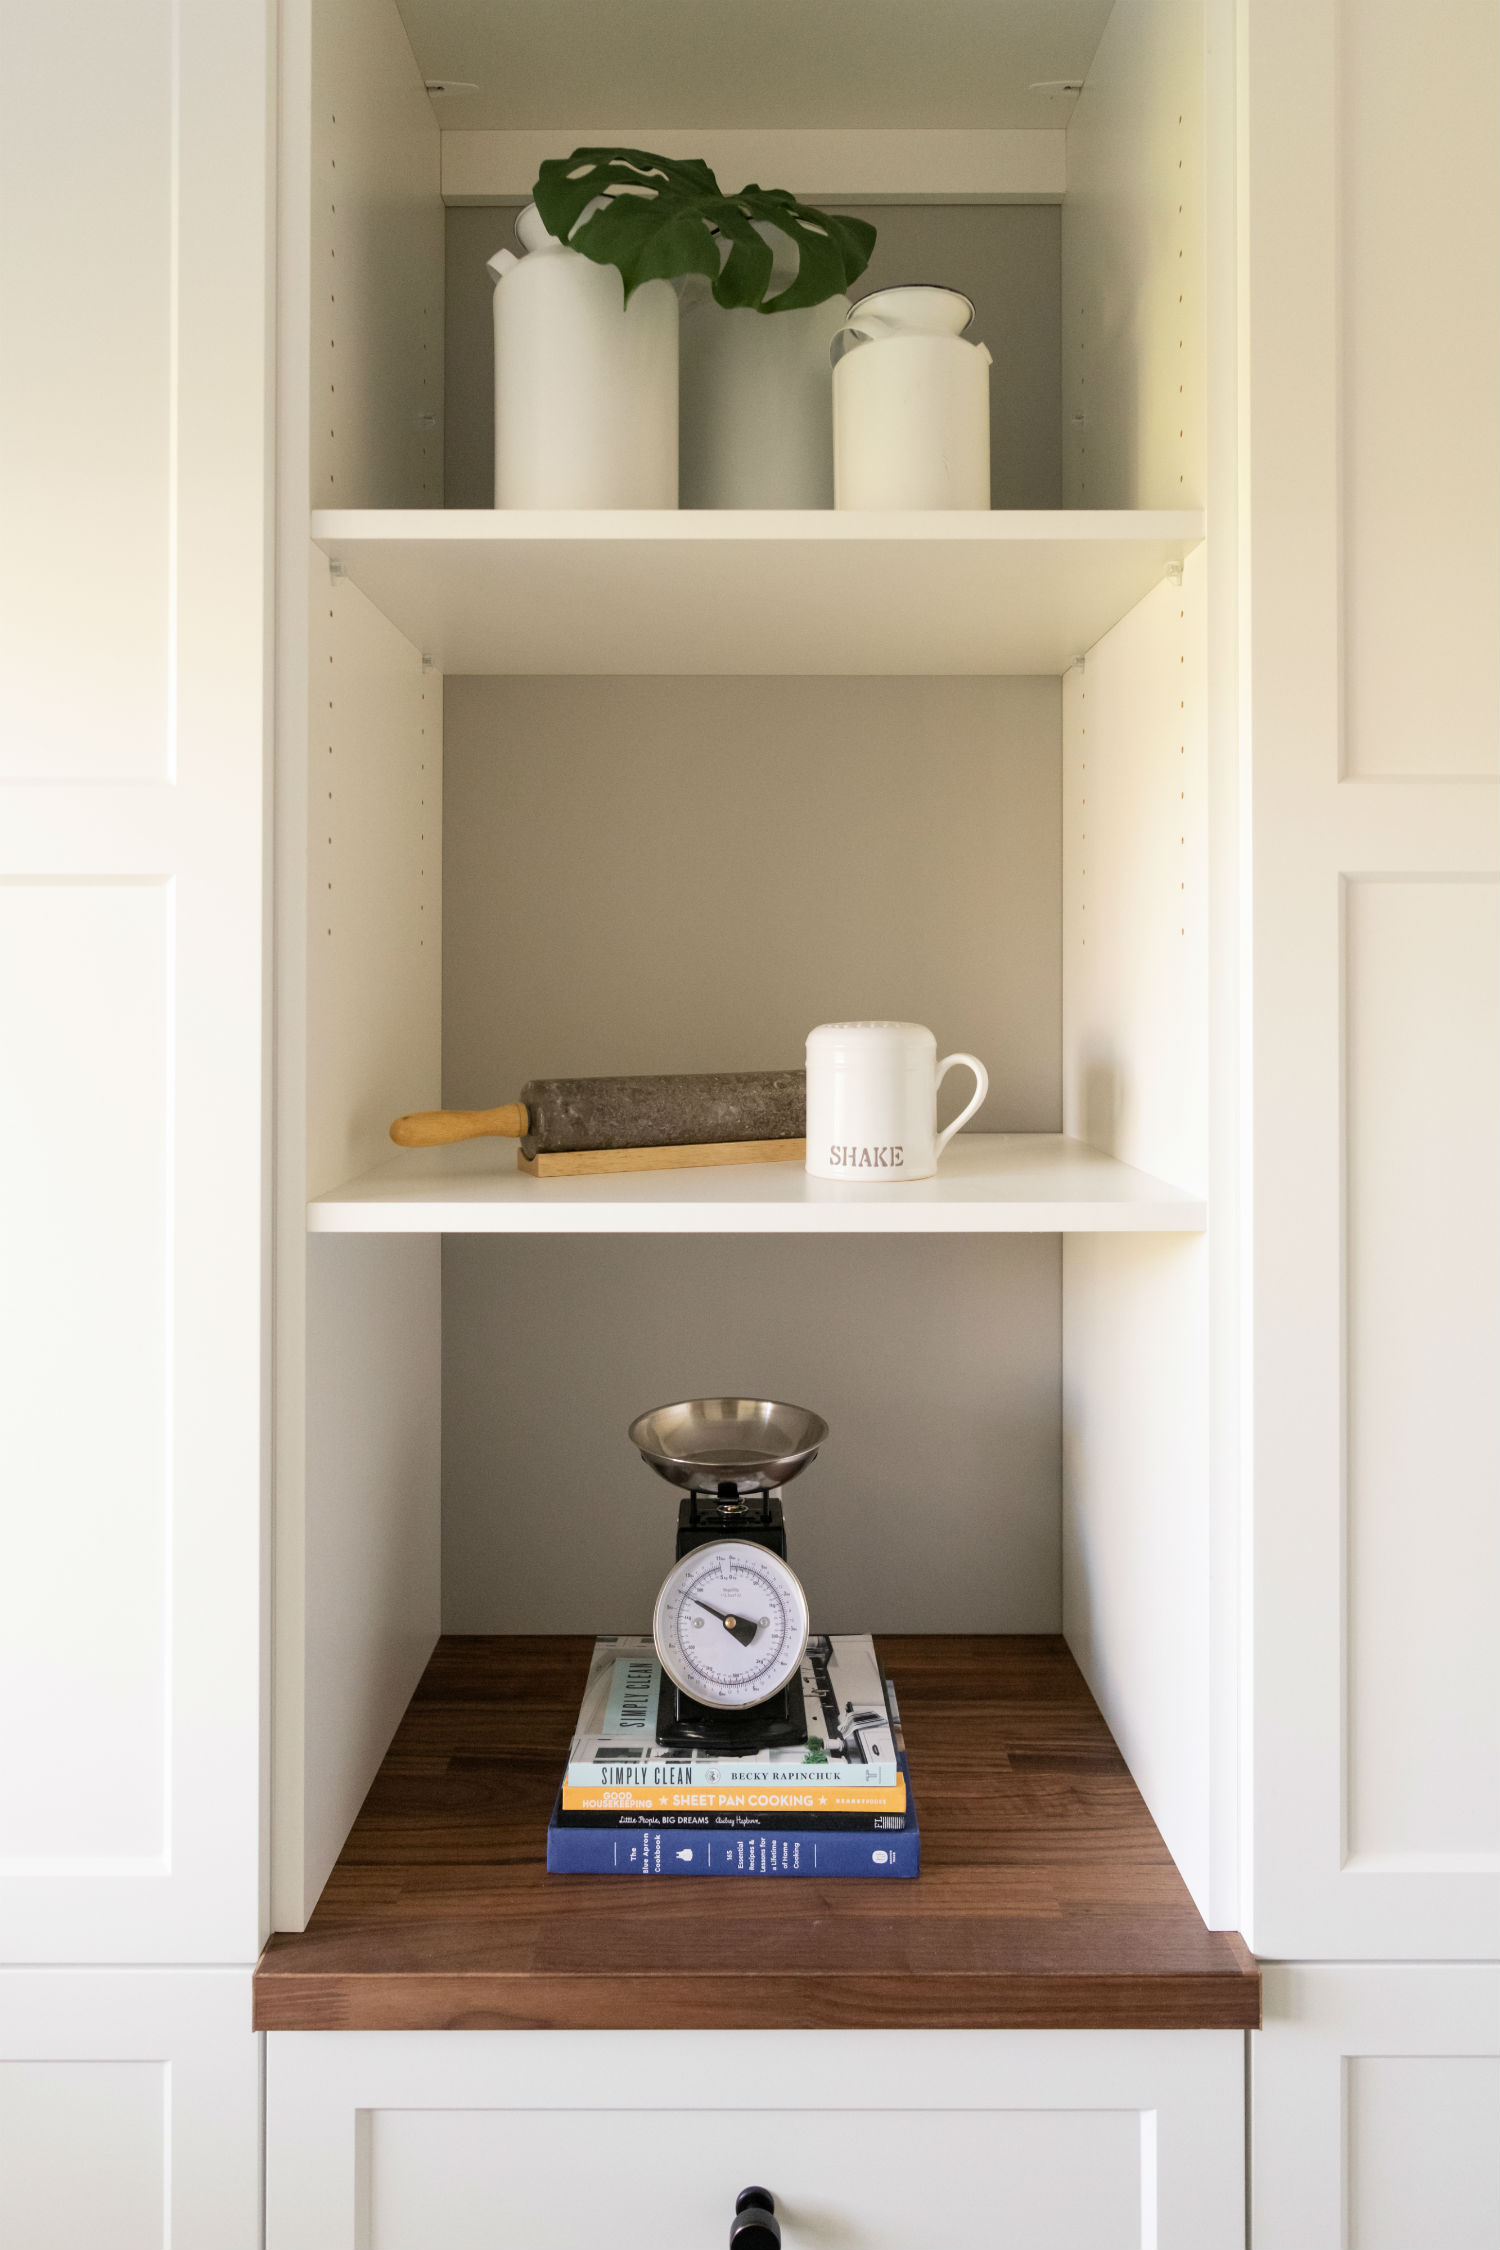 Pantry shelf with cookbooks and decor